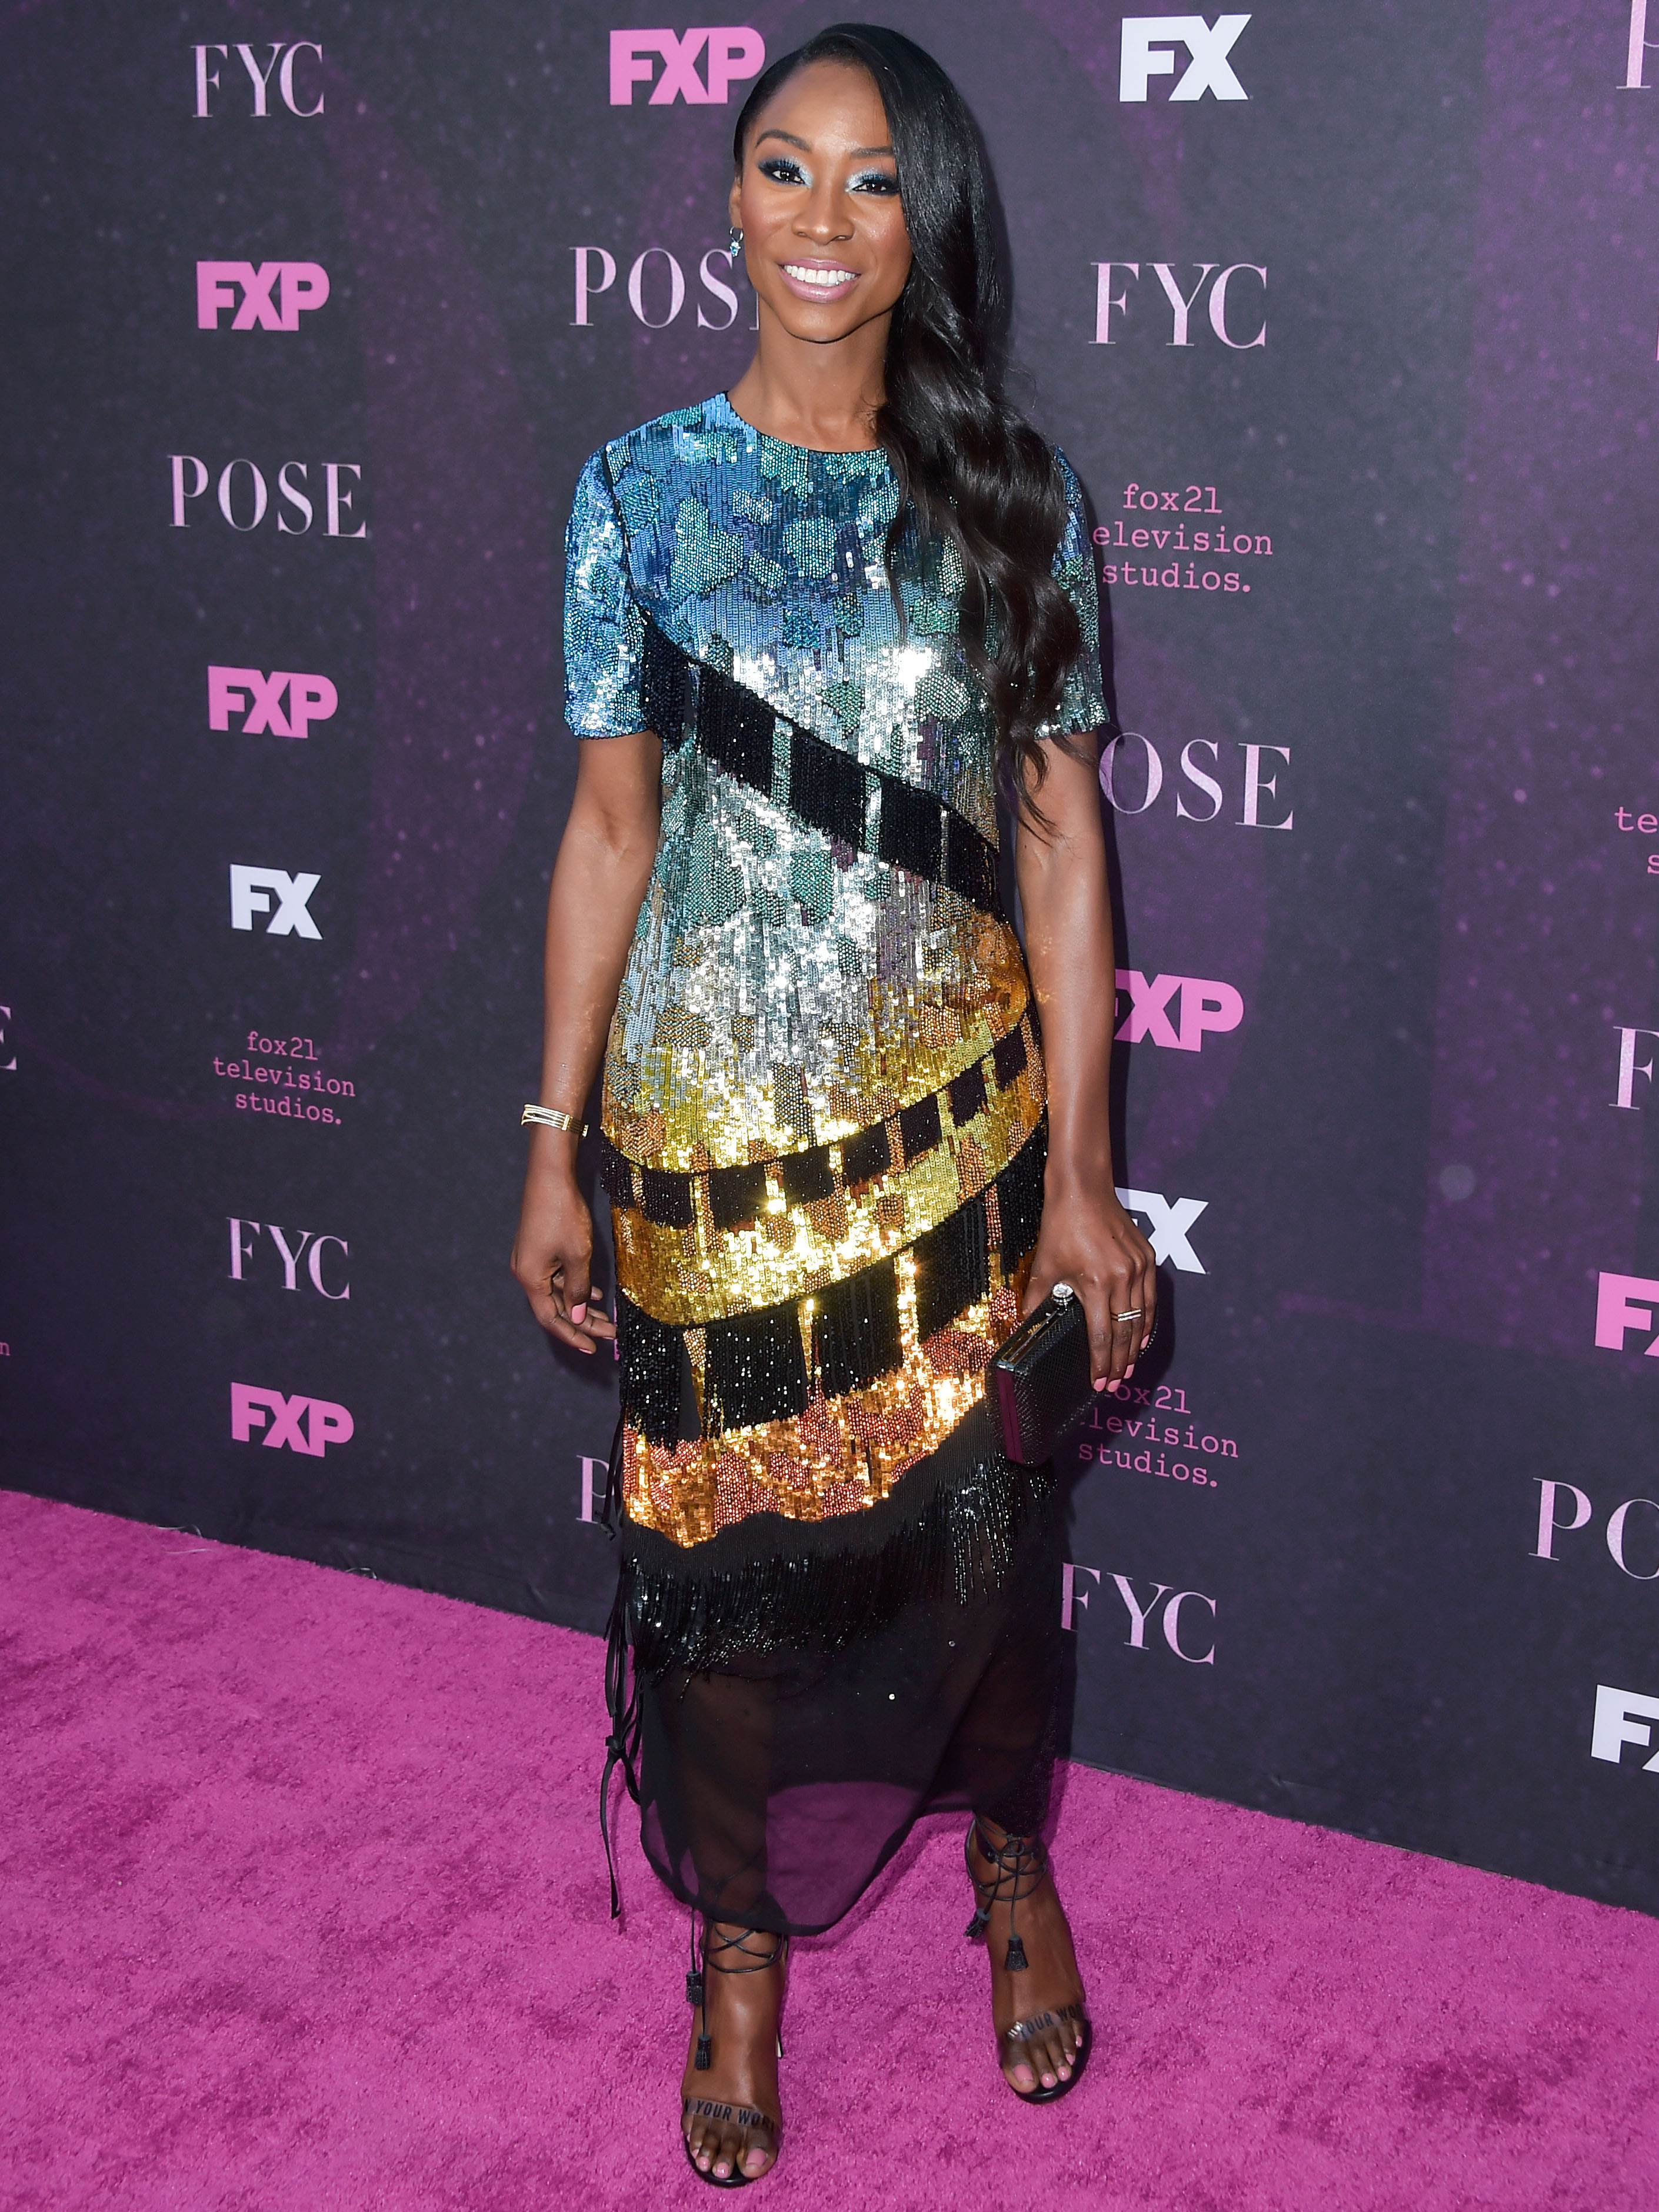 Angelica Ross arrives at the Red Carpet Event For FX's 'Pose' held at the Pacific Design Center on August 9, 2019 in West Hollywood, Los Angeles, California, United States.